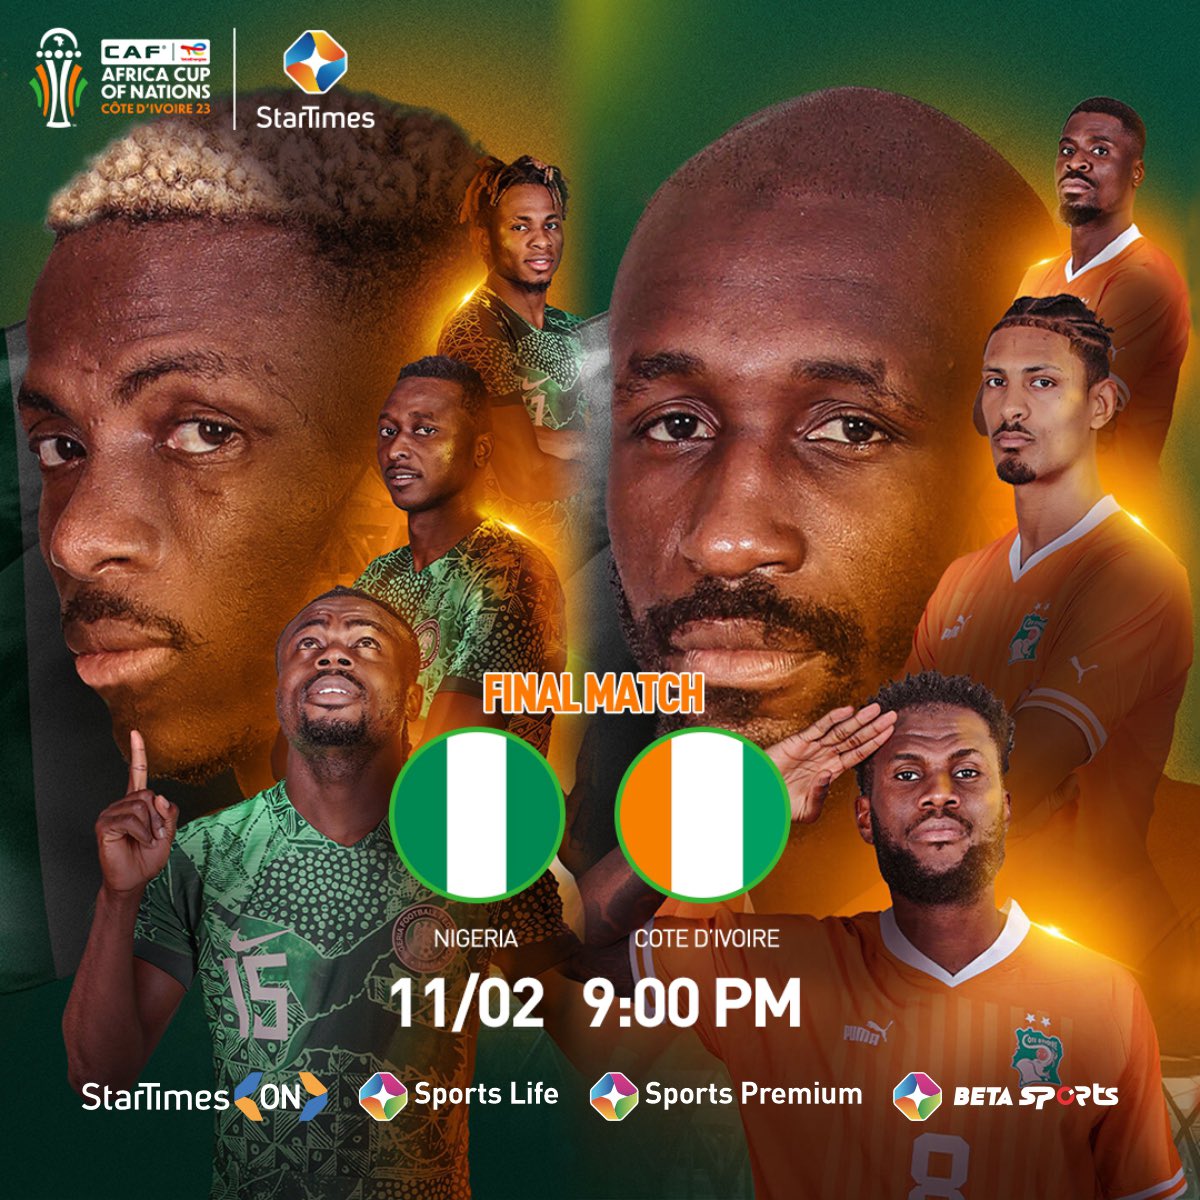 Do you know that with as low as 1k per week, you can enjoy this game on the App?

Don't miss out the final match as the Super Eagles of Nigeria will play hosts Ivory Coast at 9pm in the AFCON 2023 Final! #StarTimesSports